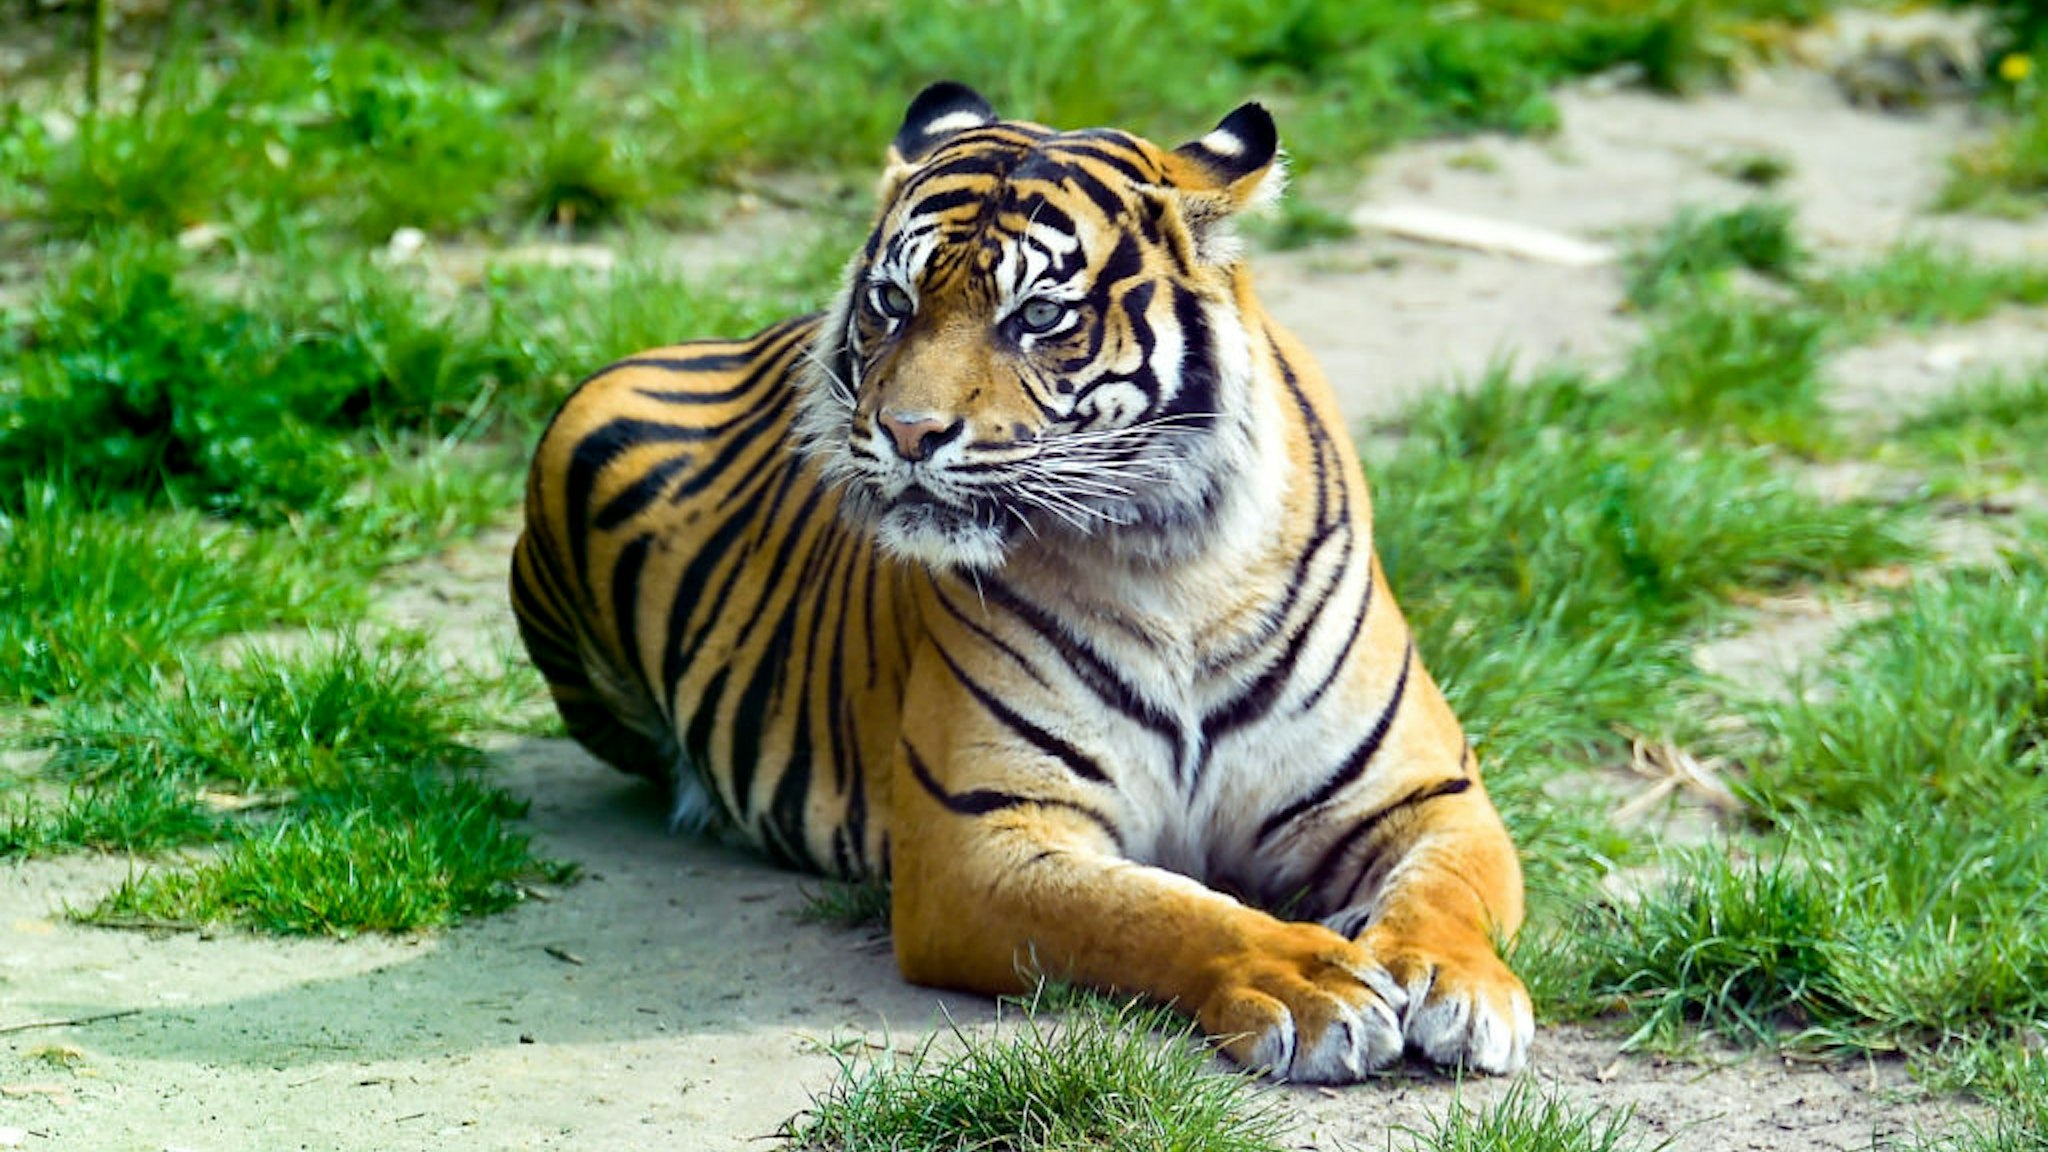 a tiger (lat. Panthera tigris) on May 01, 2021 in Osnabrueck, Germany.